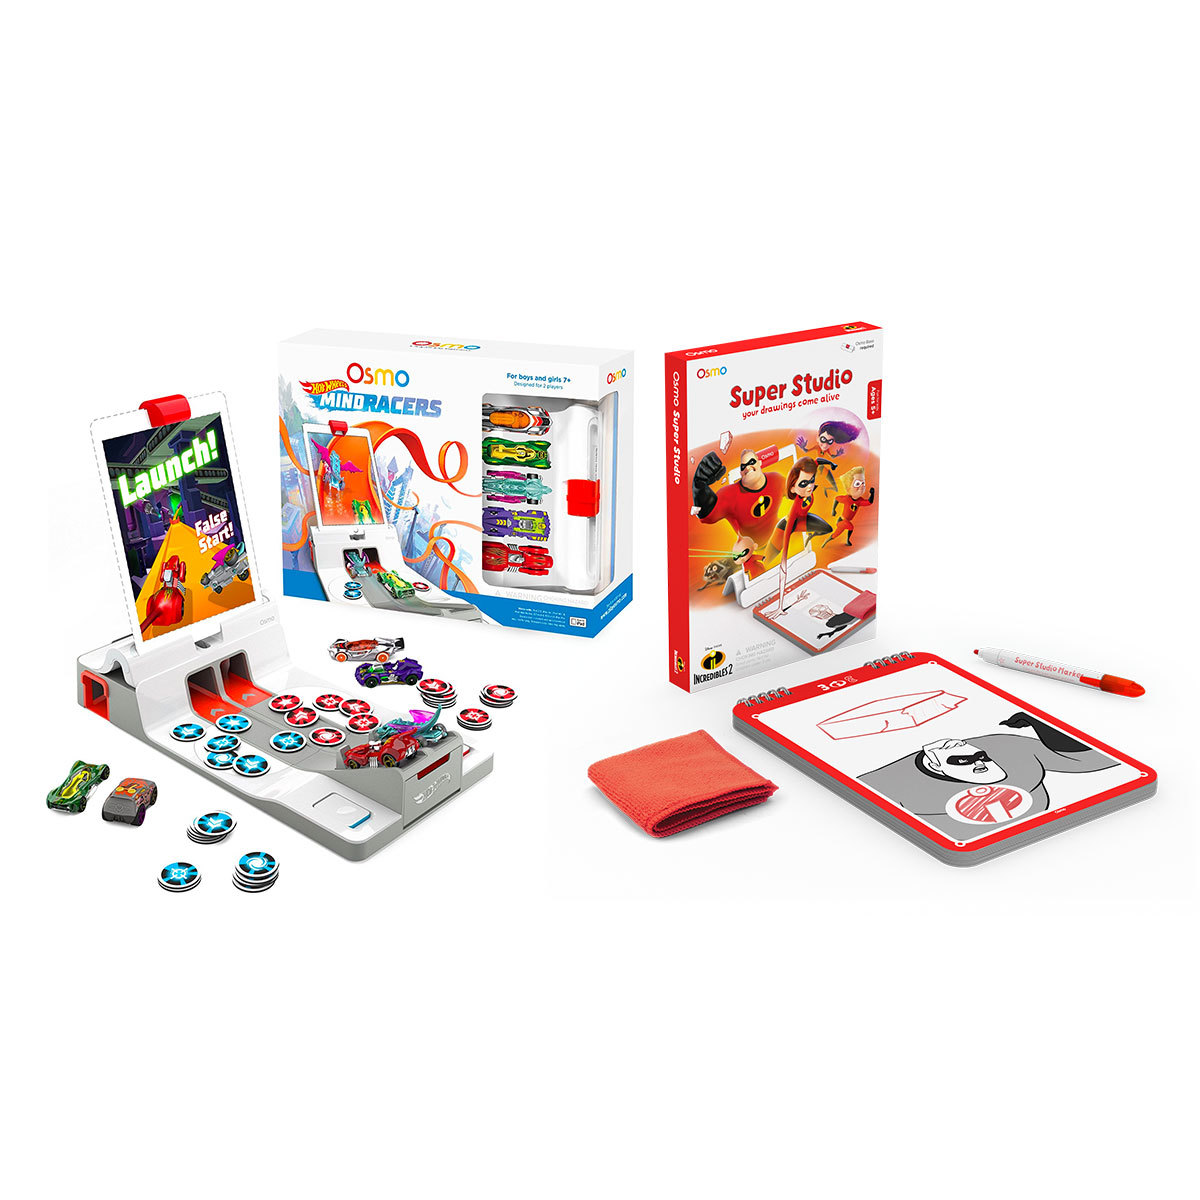 osmo mindracers game